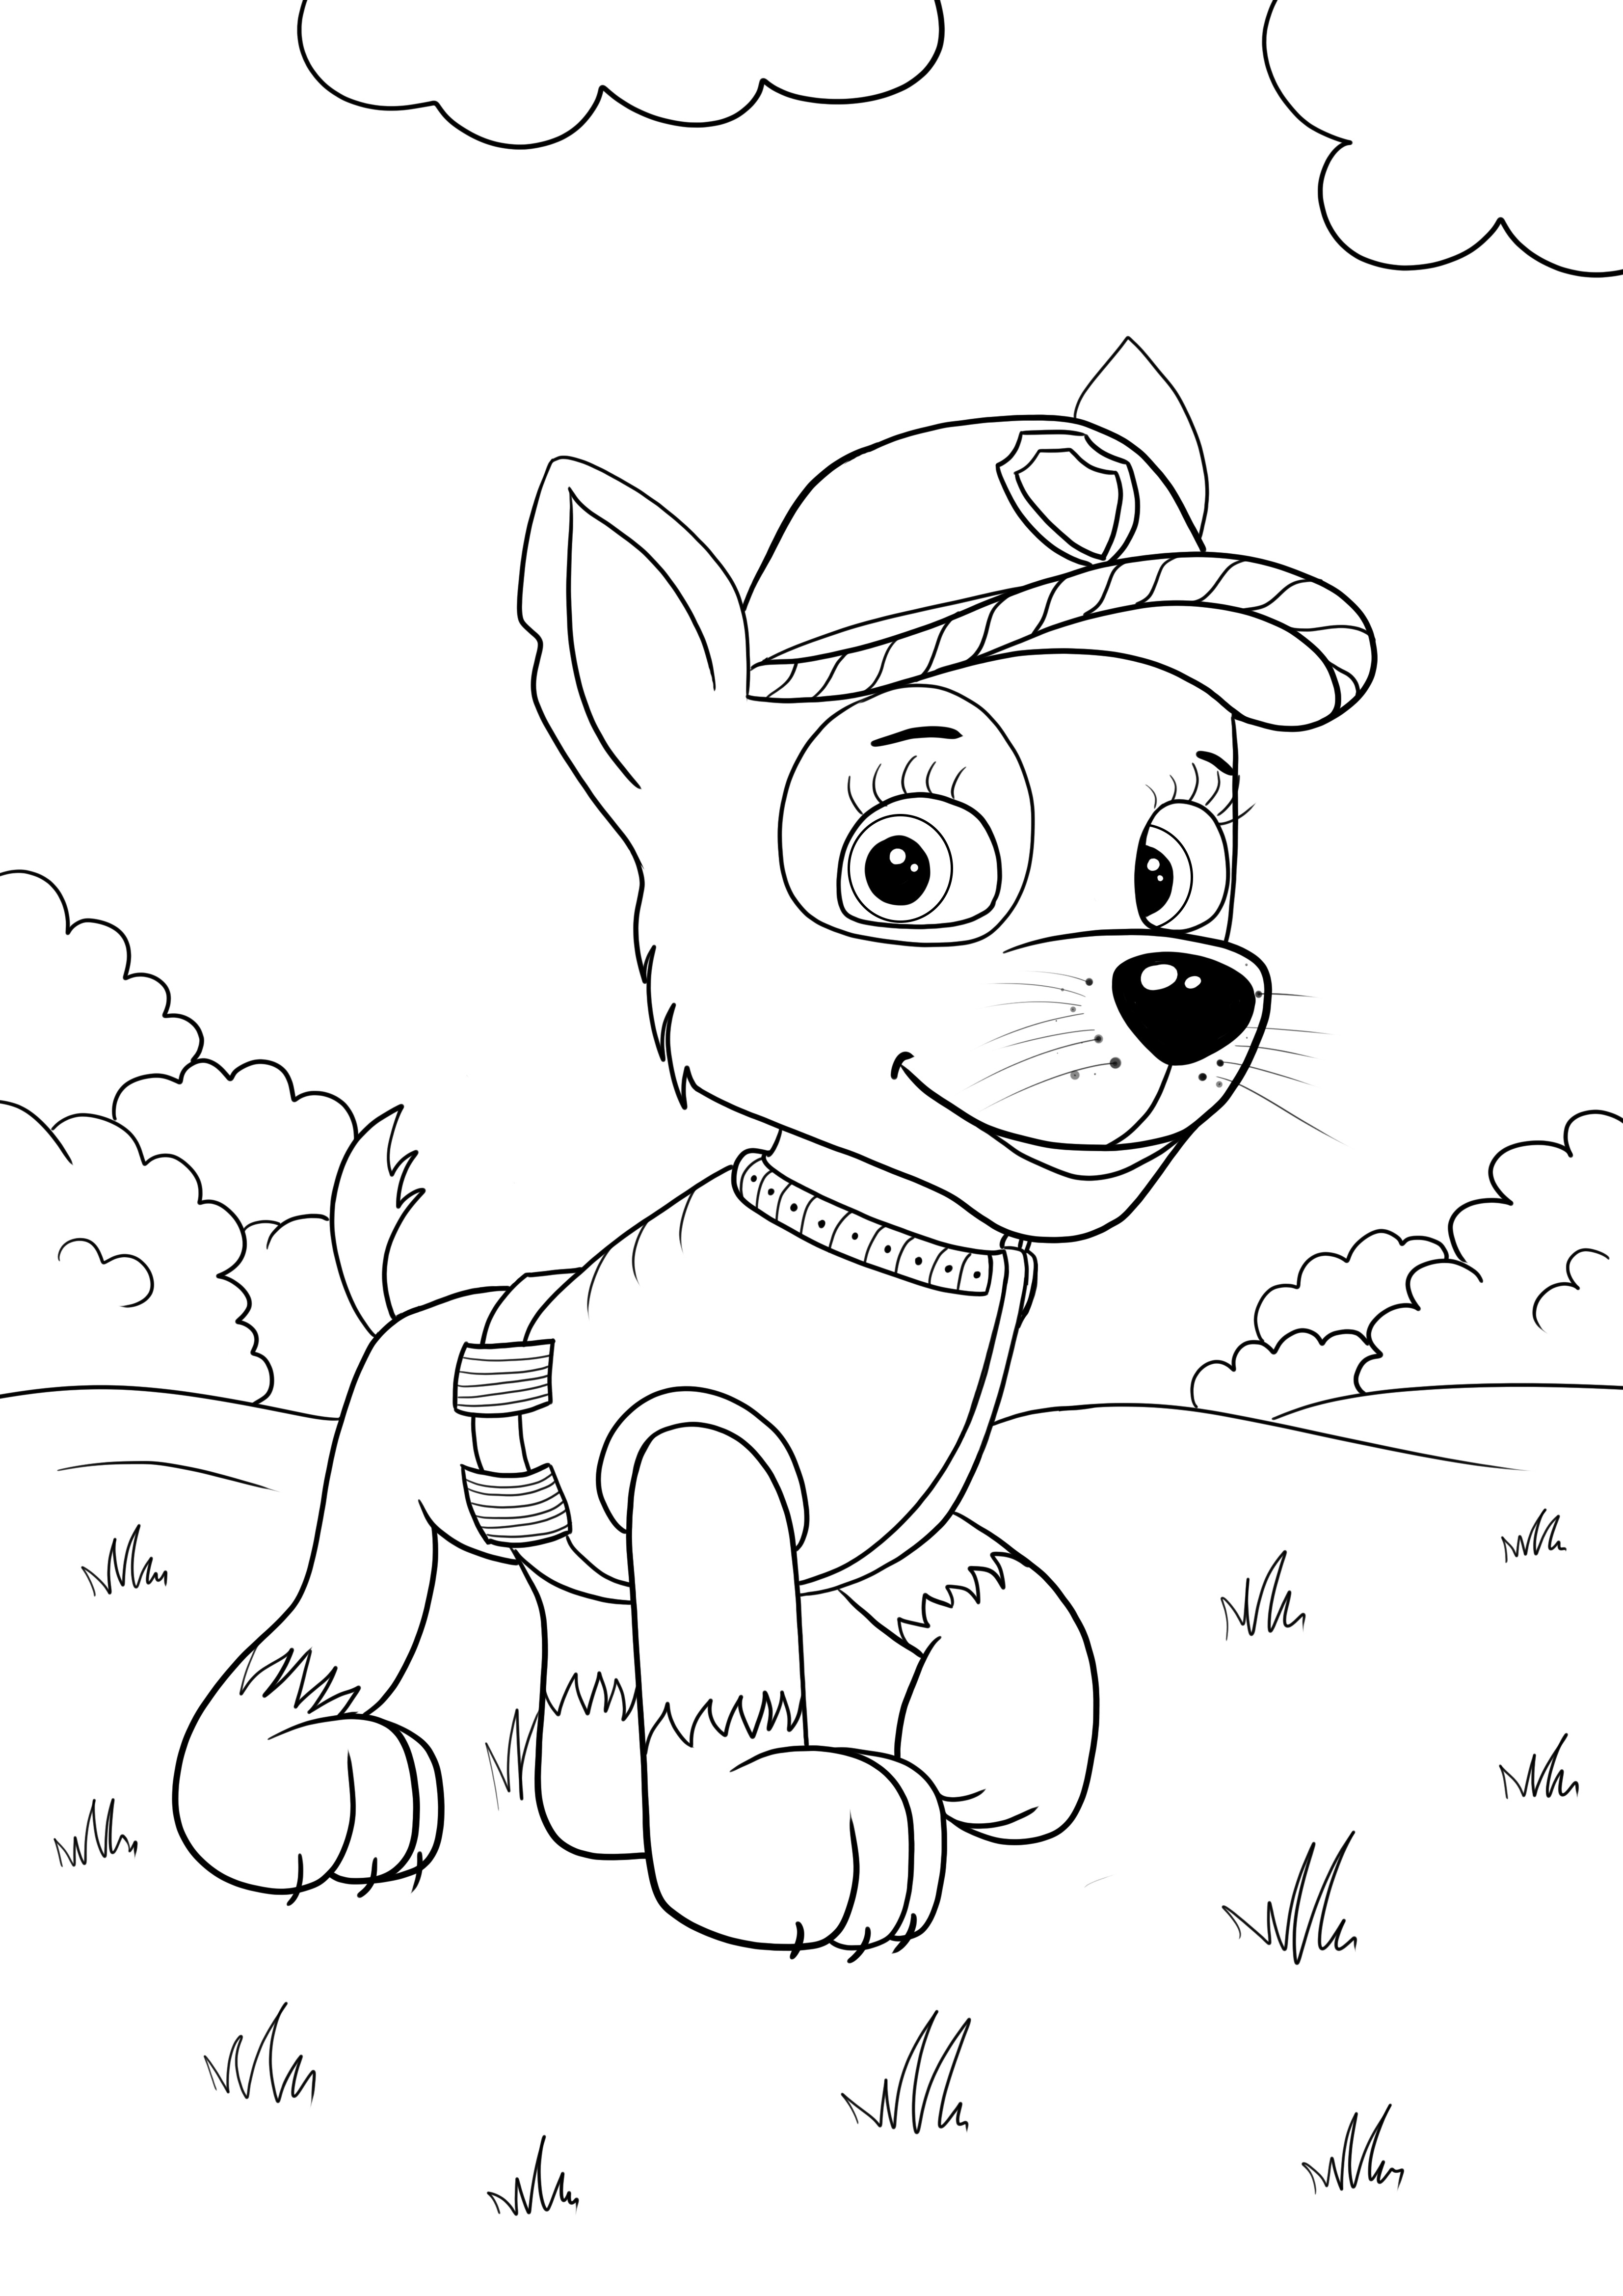 Chase from Paw Patrol free printable for easy coloring